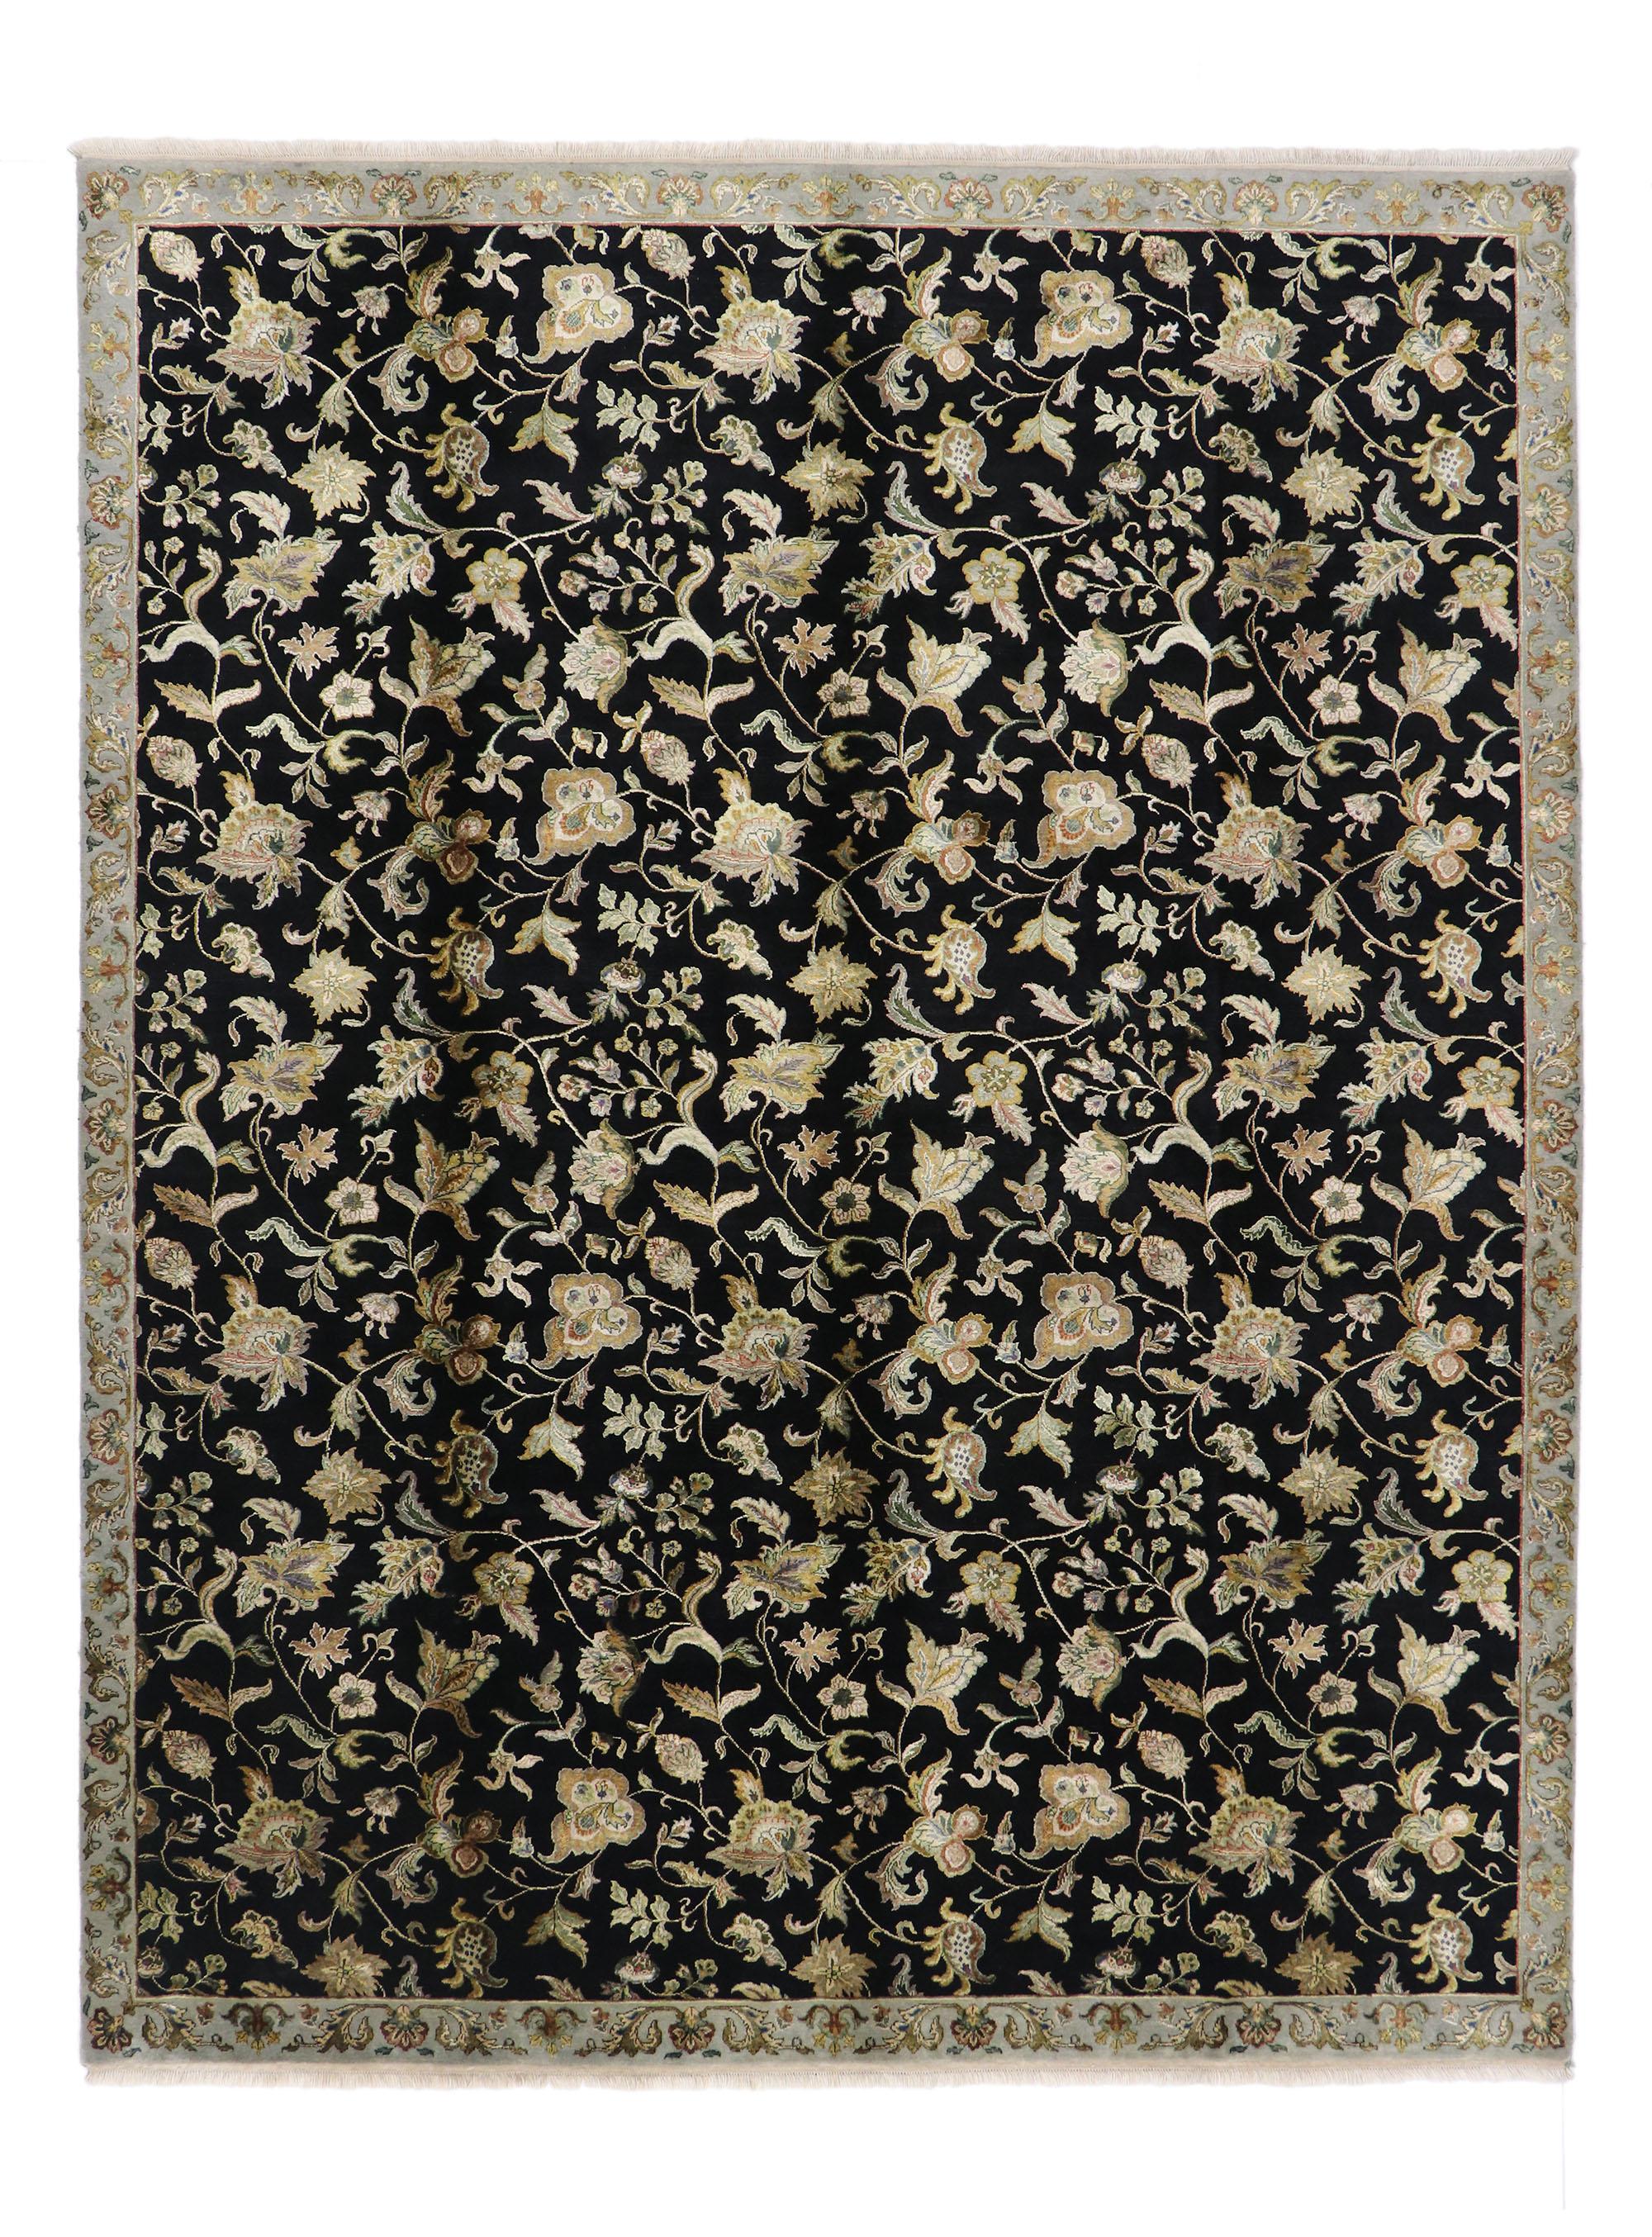 76873, vintage Hollywood Regency style area rug. Striking and eclectic, this hand knotted wool vintage Indian rug features the deep black and gold colorway of the Hollywood Regency style. An all-over pattern of undulating tendrils and florals covers